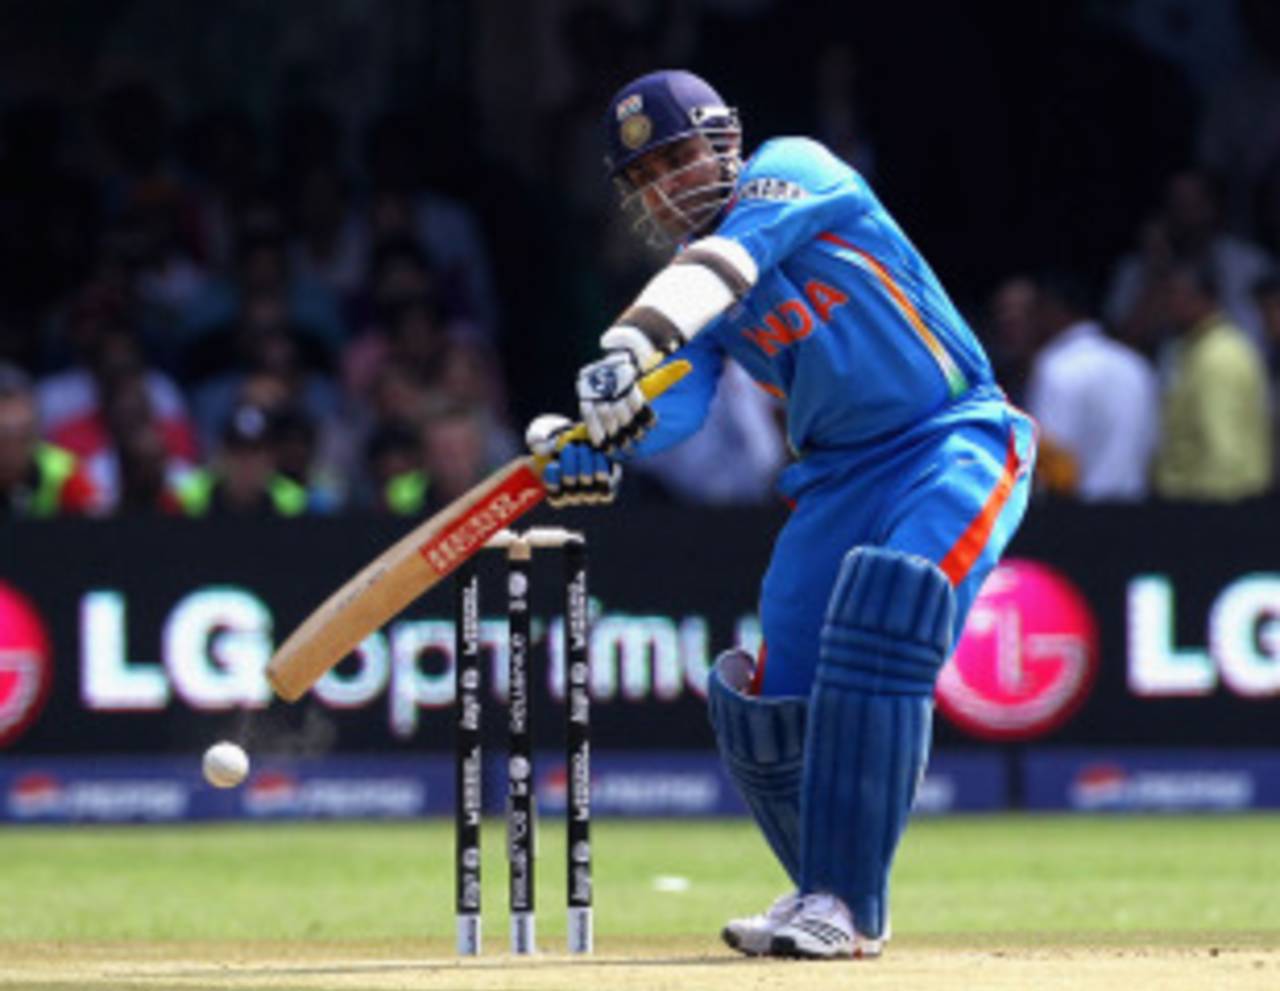 Virender Sehwag began the innings with a few streaky shots, India v England, World Cup, Group B, Bangalore, February 27, 2011